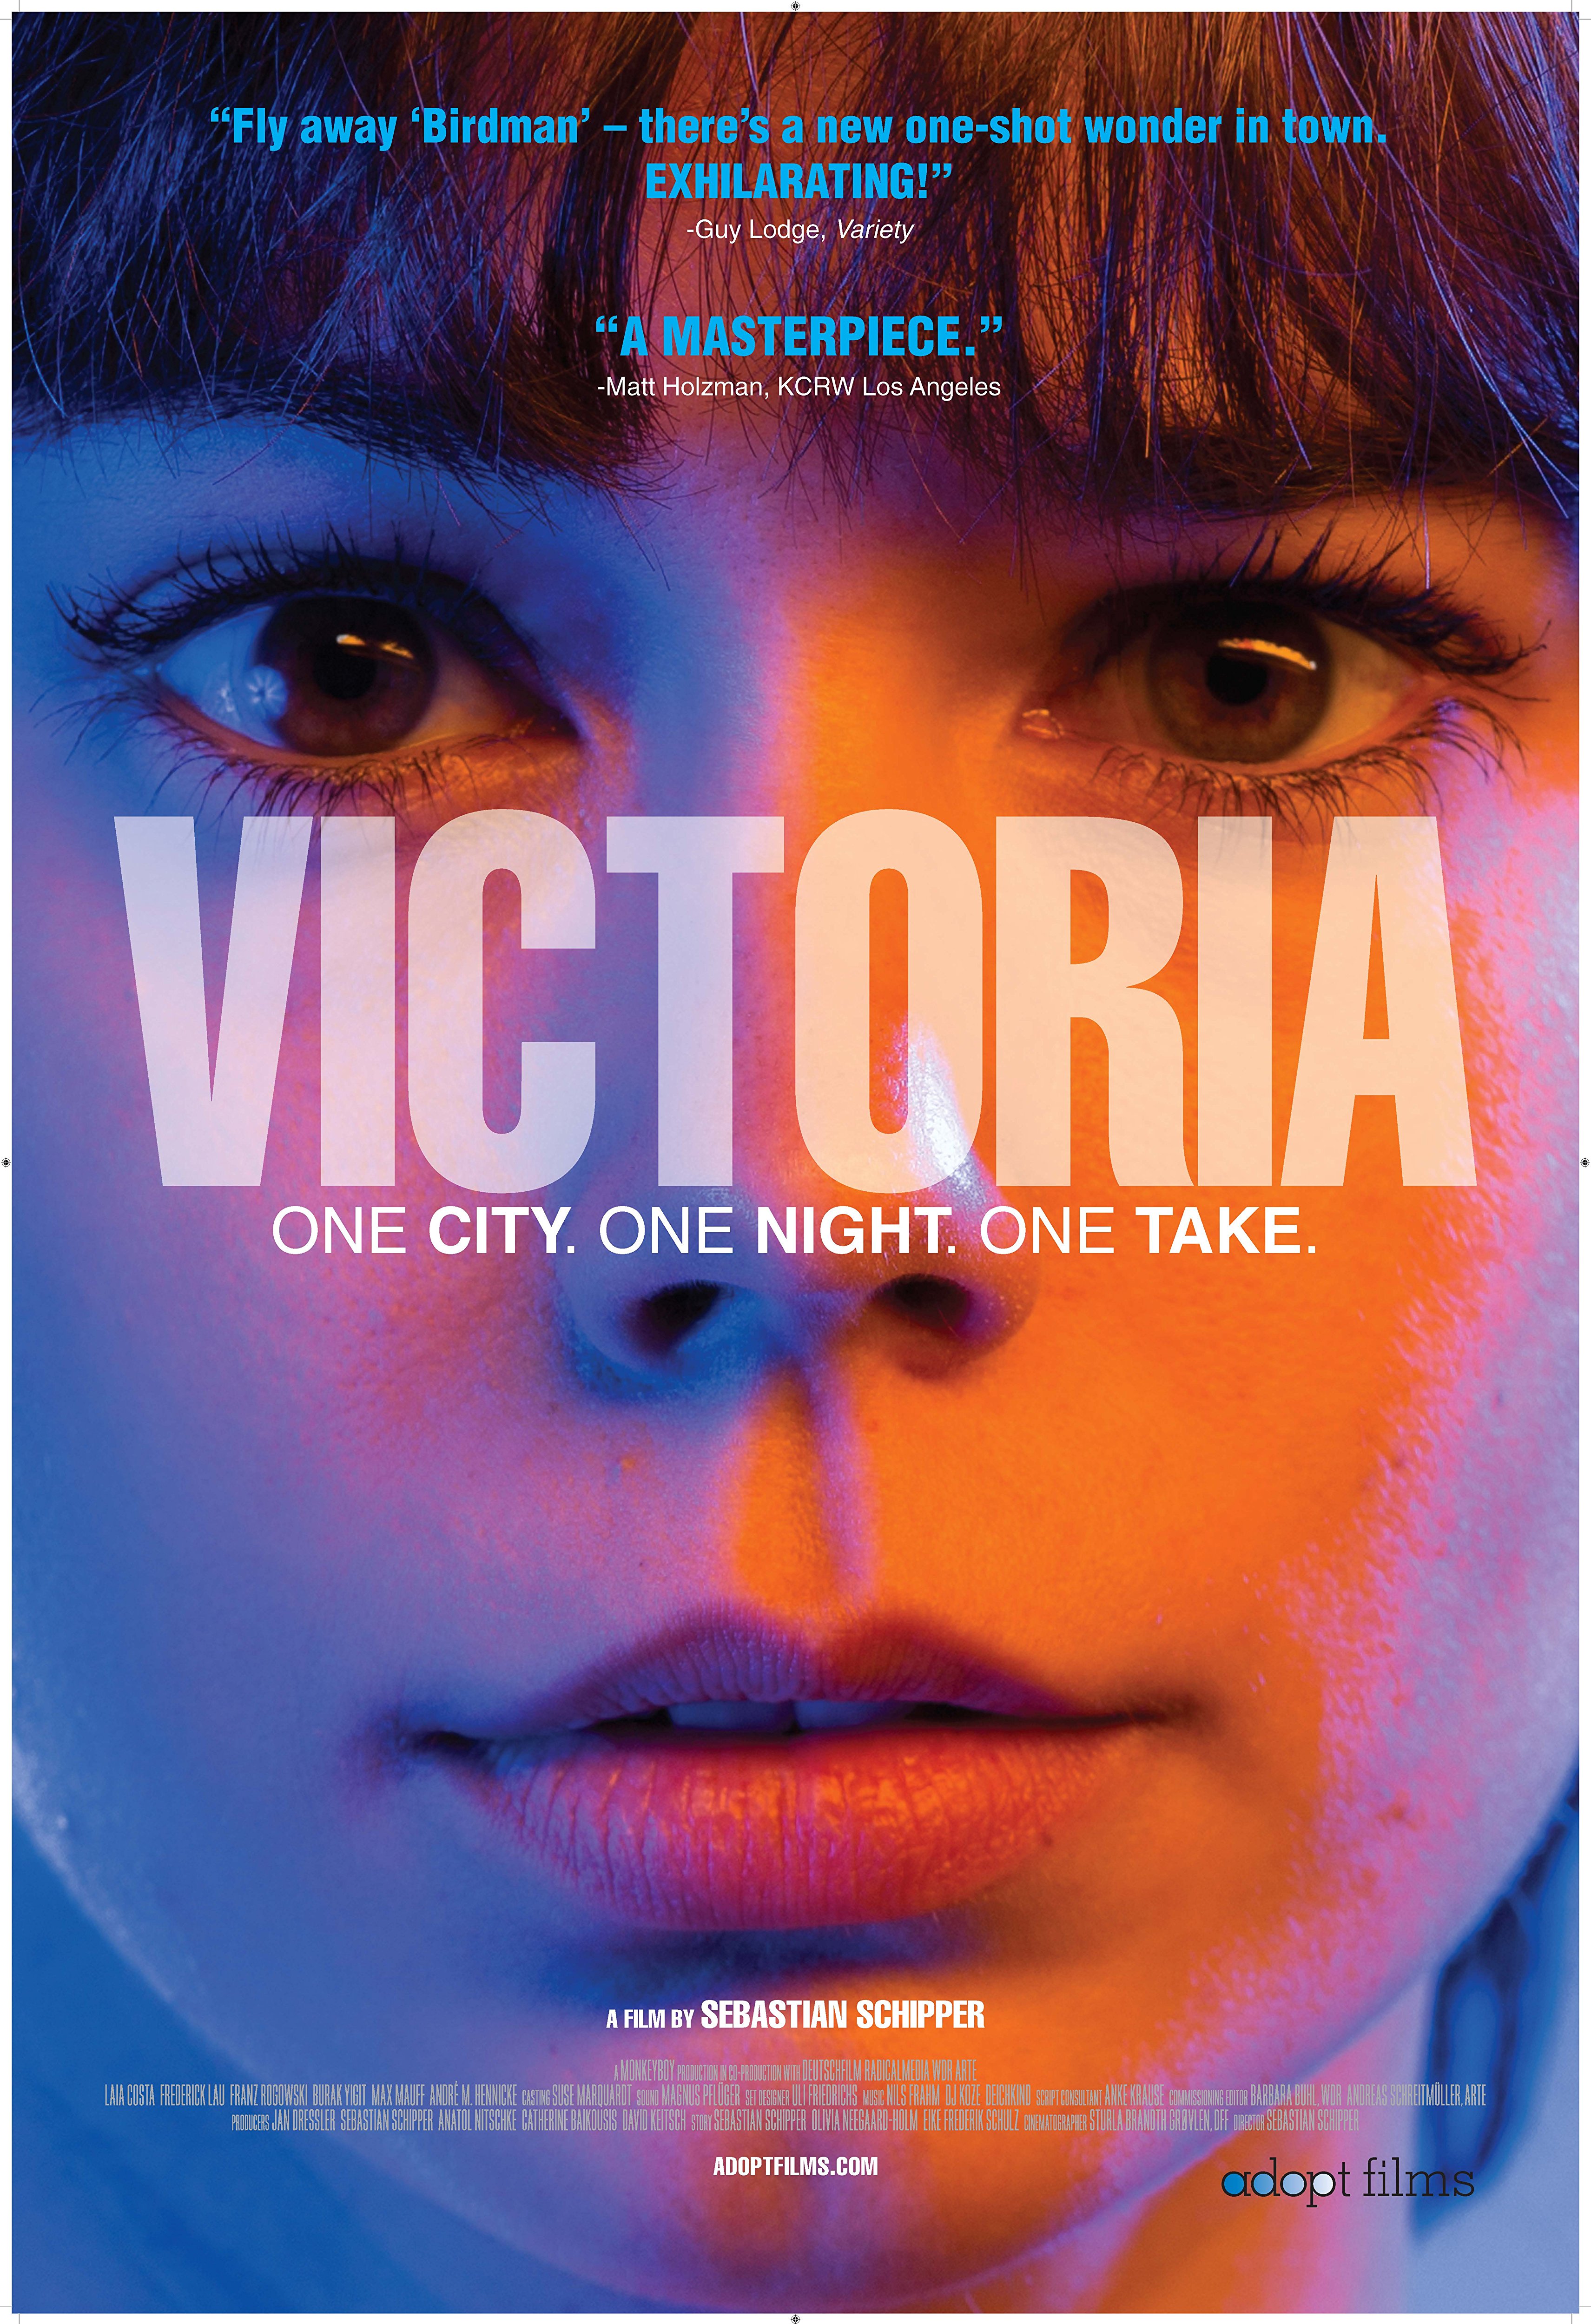 victoria movie review rotten tomatoes